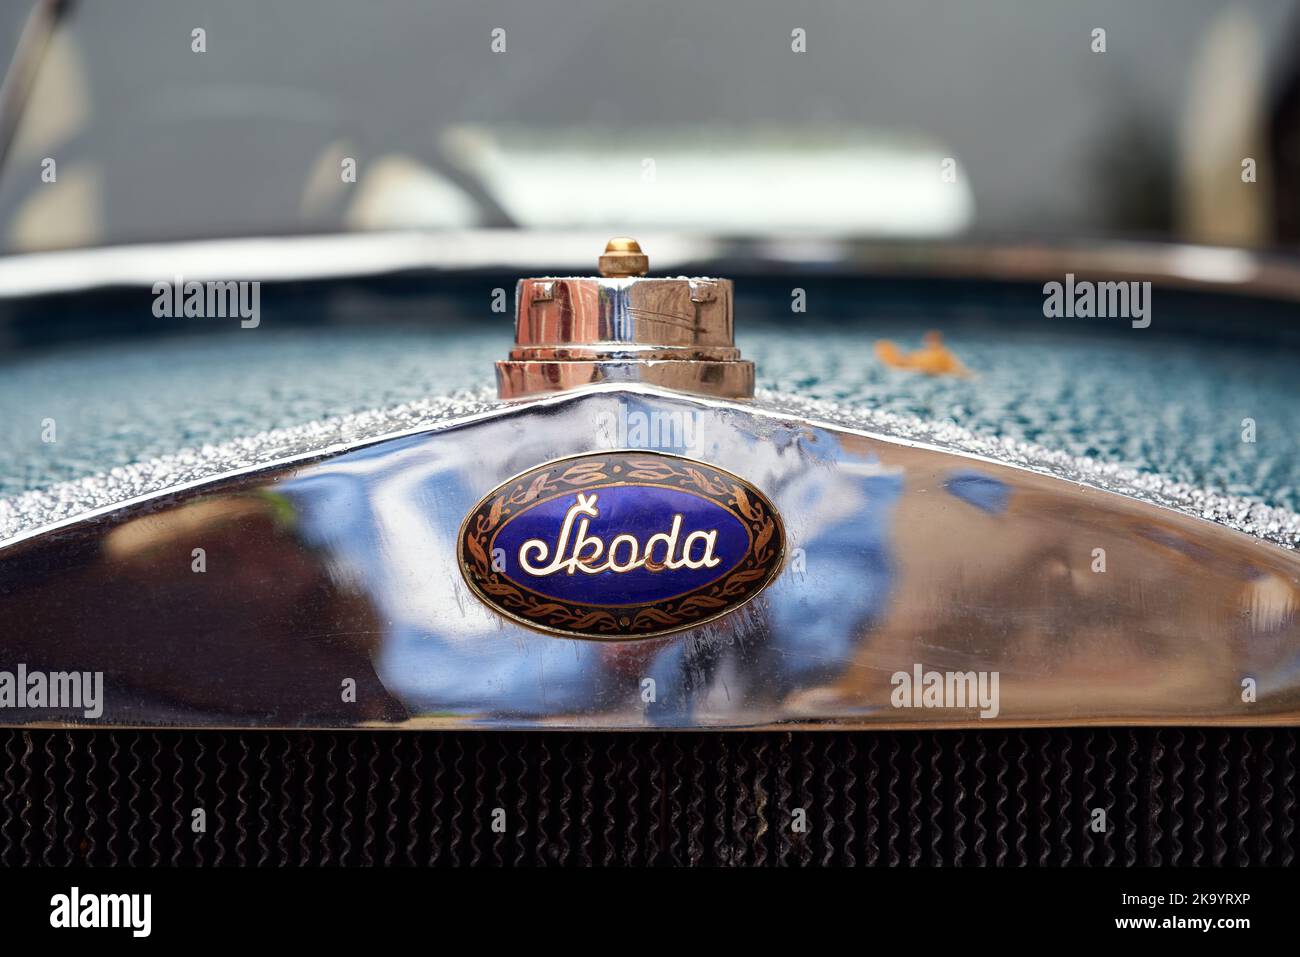 PRAGUE, CZECH REPUBLIC - OCTOBER 1, 2022: Close up of Skoda logo on a blue vintage car with droplets of water Stock Photo